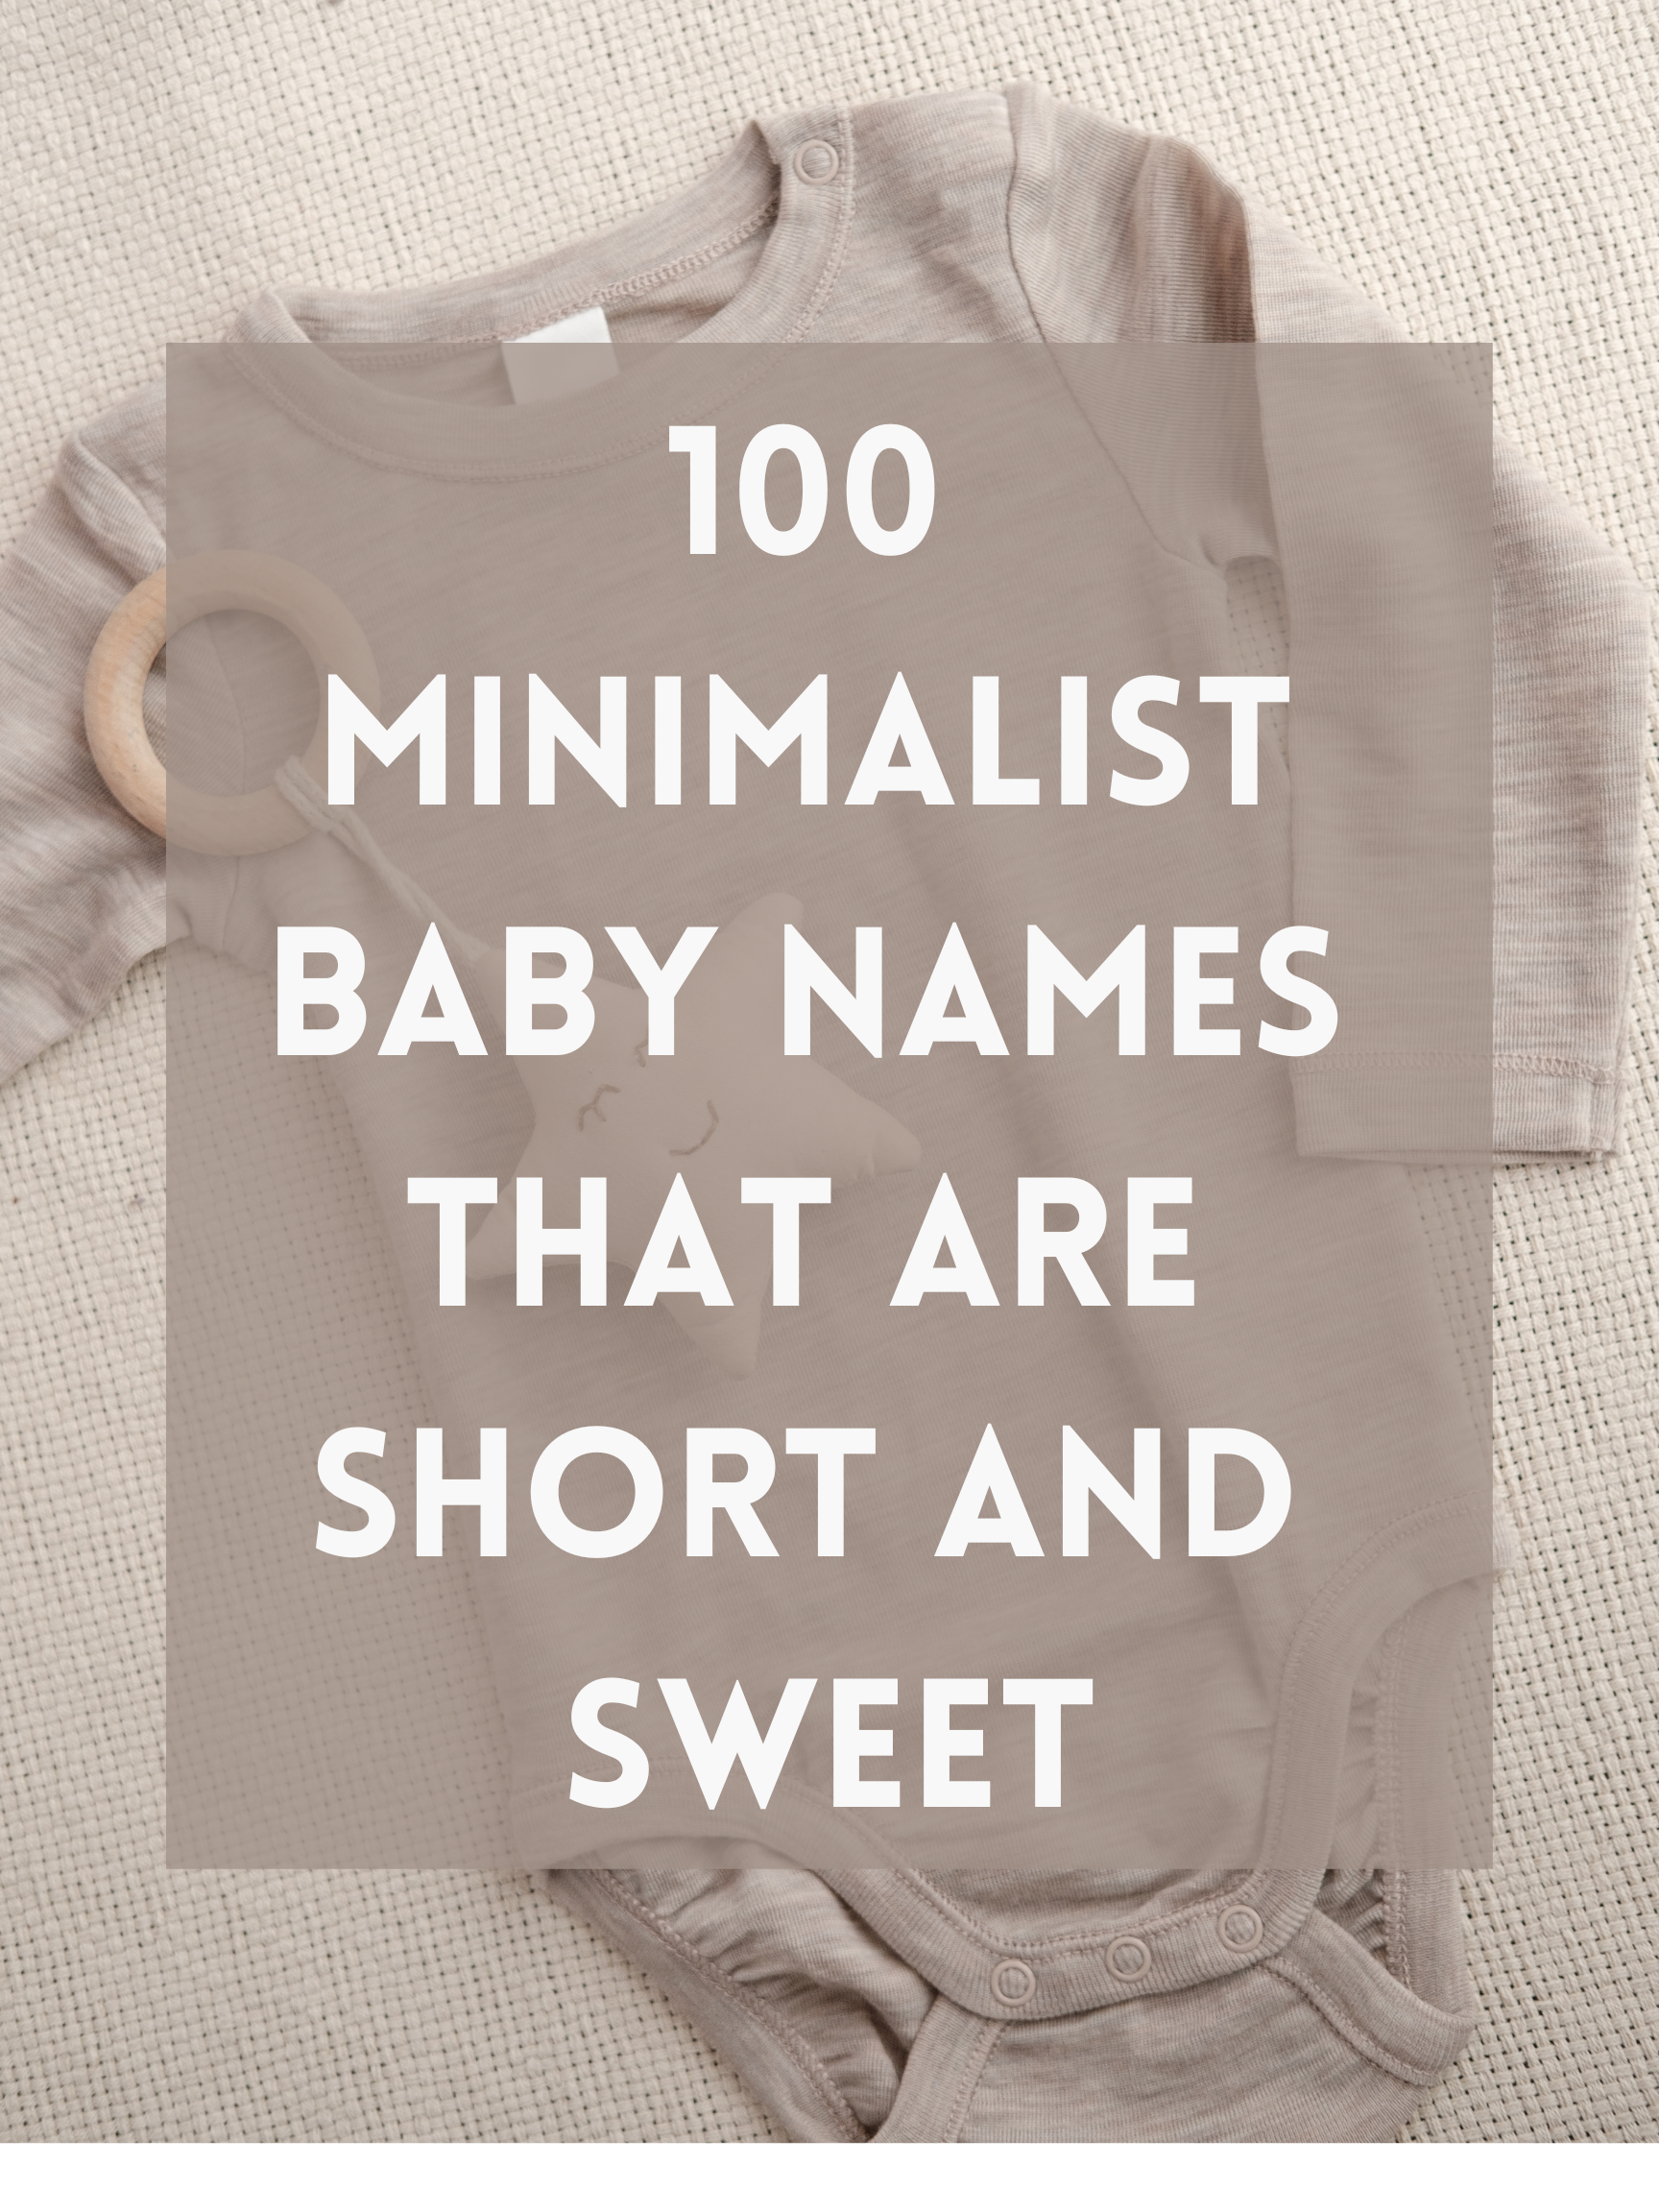 100 Minimalist Baby Names That Are Short and Sweet